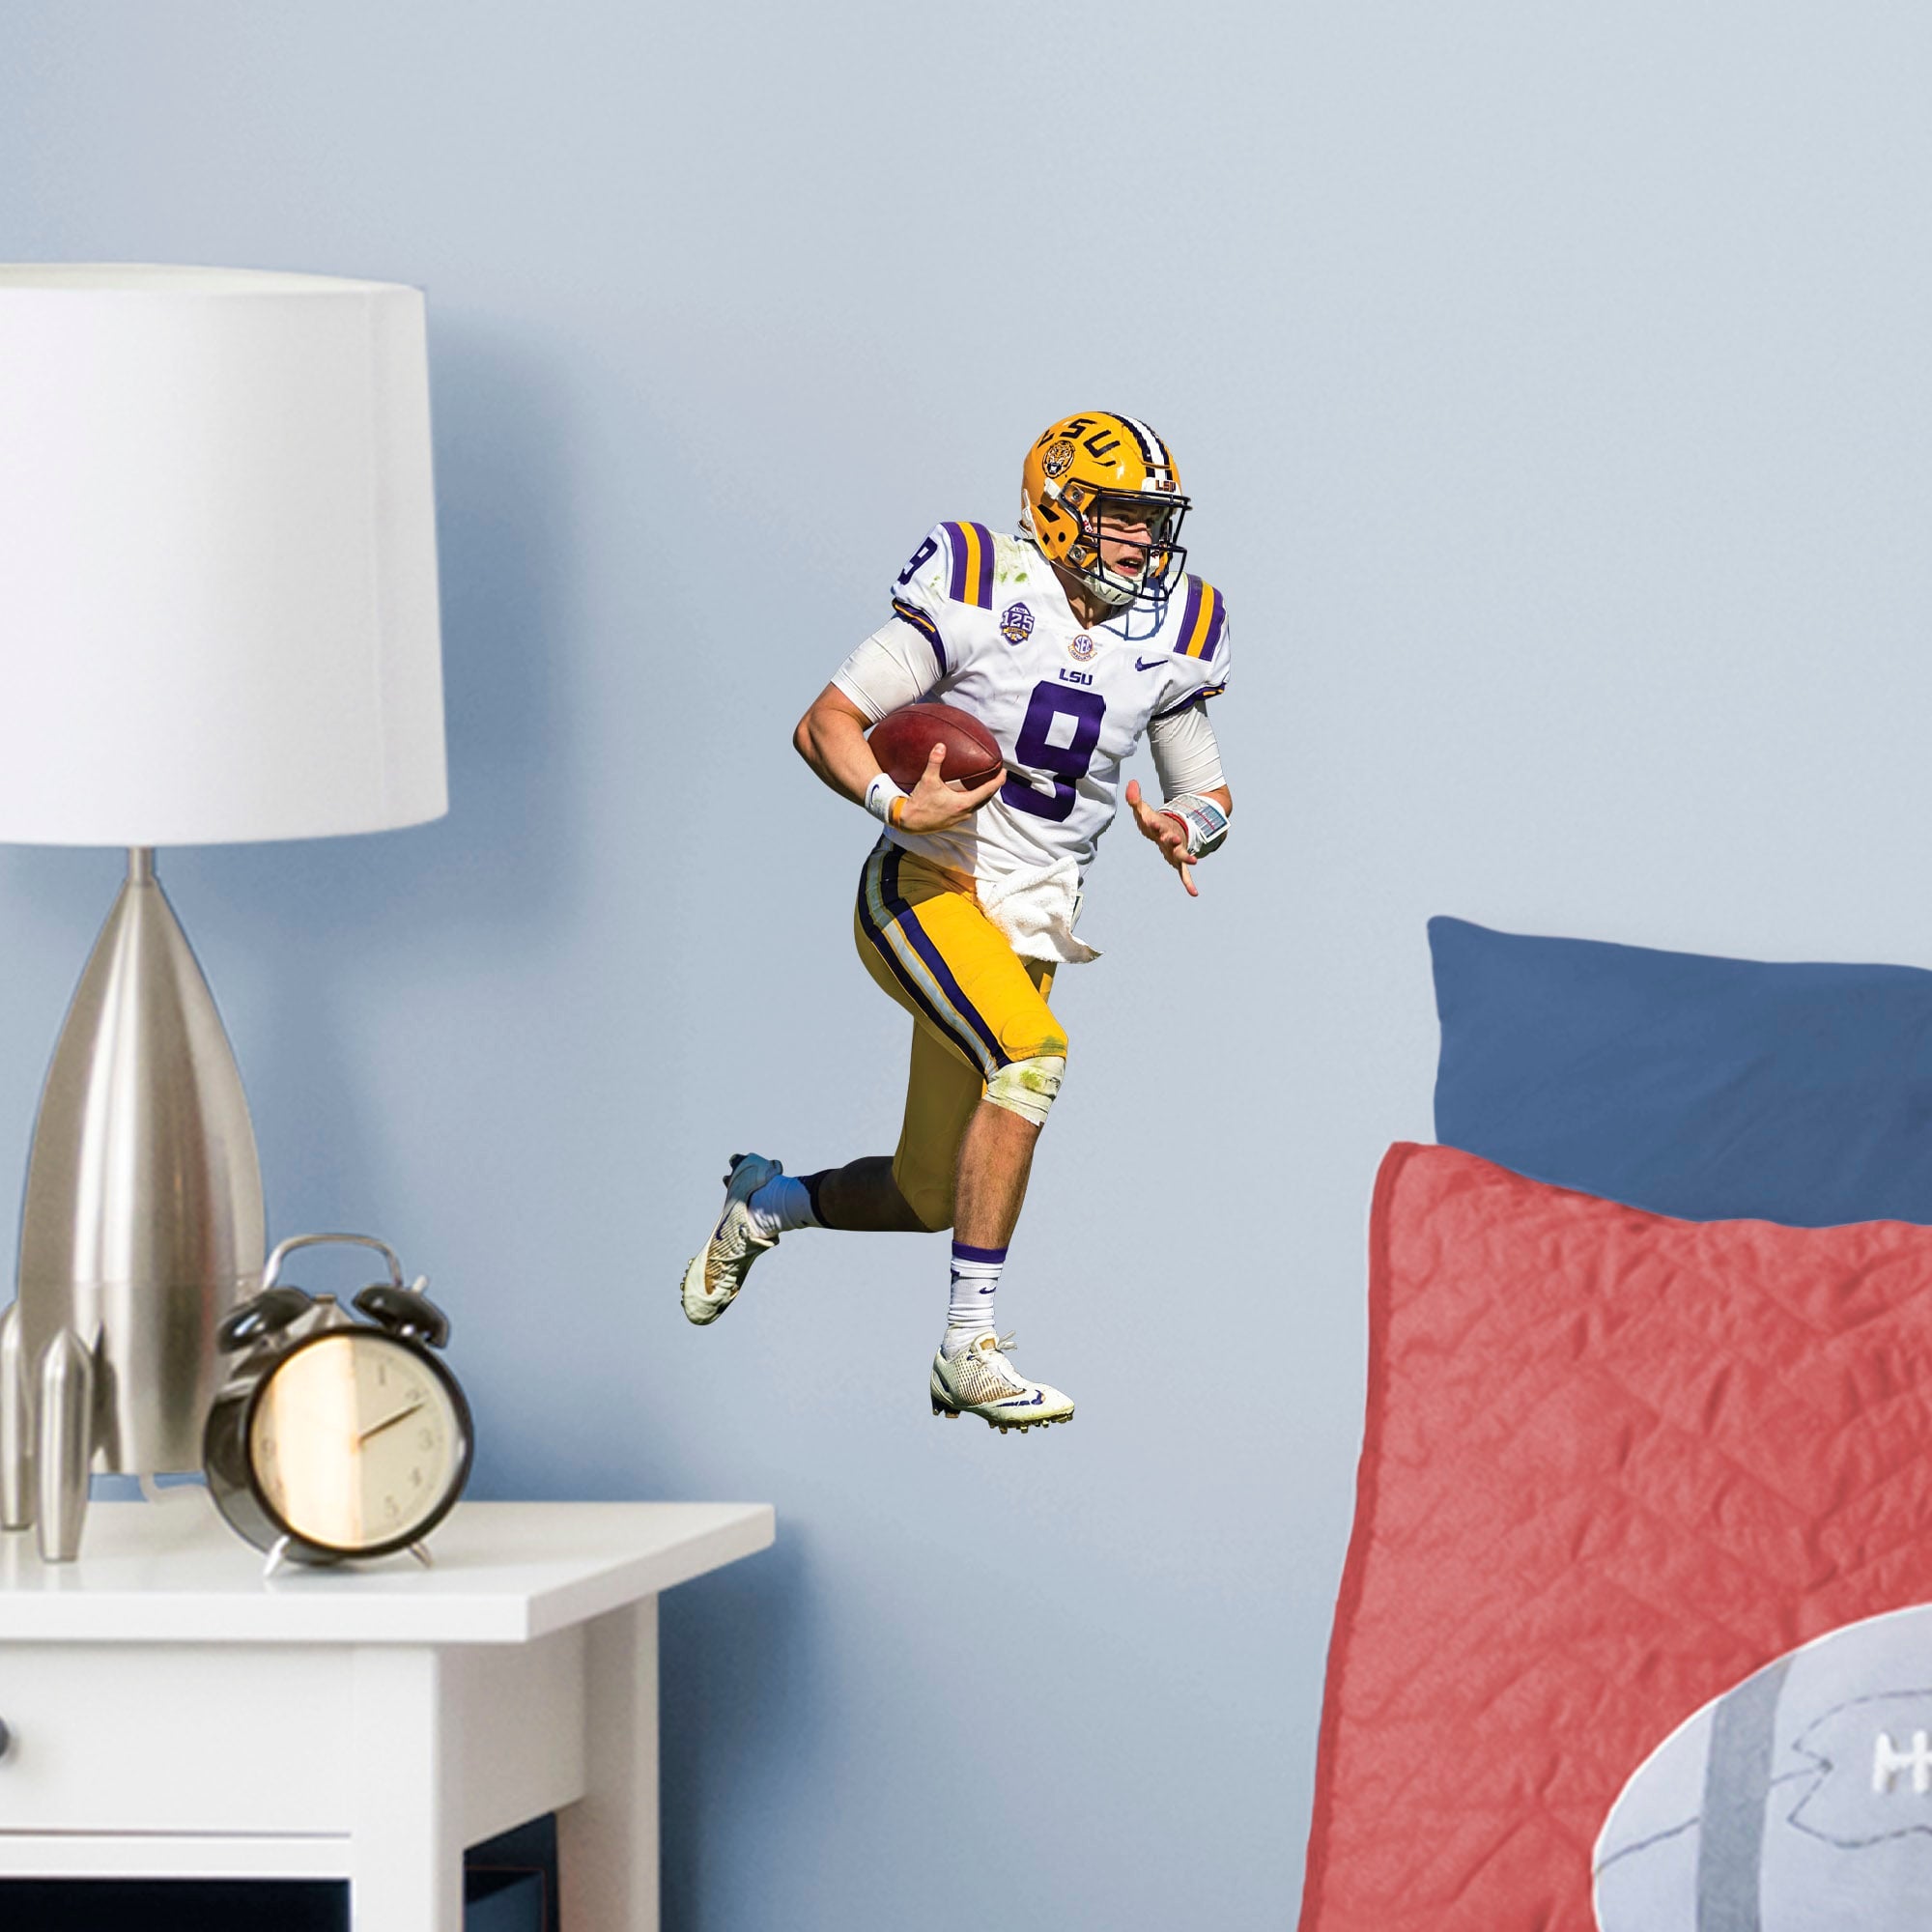 Joe Burrow for LSU Tigers: LSU - Officially Licensed Removable Wall Decal Large by Fathead | Vinyl